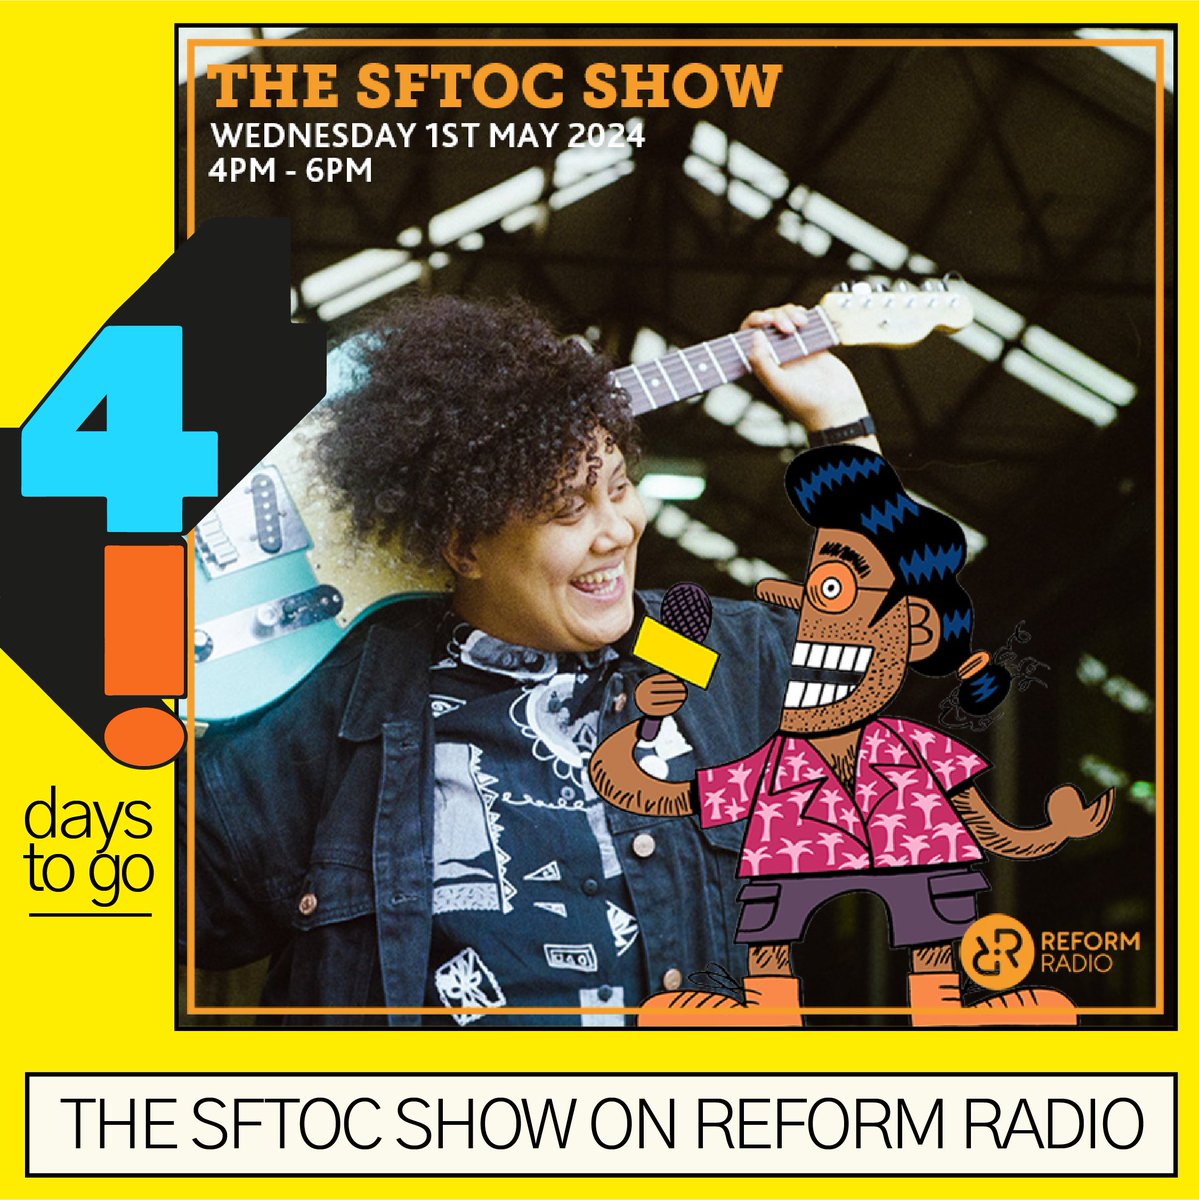 📻 We’re on @ReformRadioMCR this aft! We’ll be exploring SFTOC24 through the eyes of all of ya': first–timers, faithfuls, weirdos & queerdos; with special guest/@SamarbetaMR artist in residence Ray Aggs..

Listen 4 ’til 6 on reformradio.co.uk, DAB radio or smart speaker.